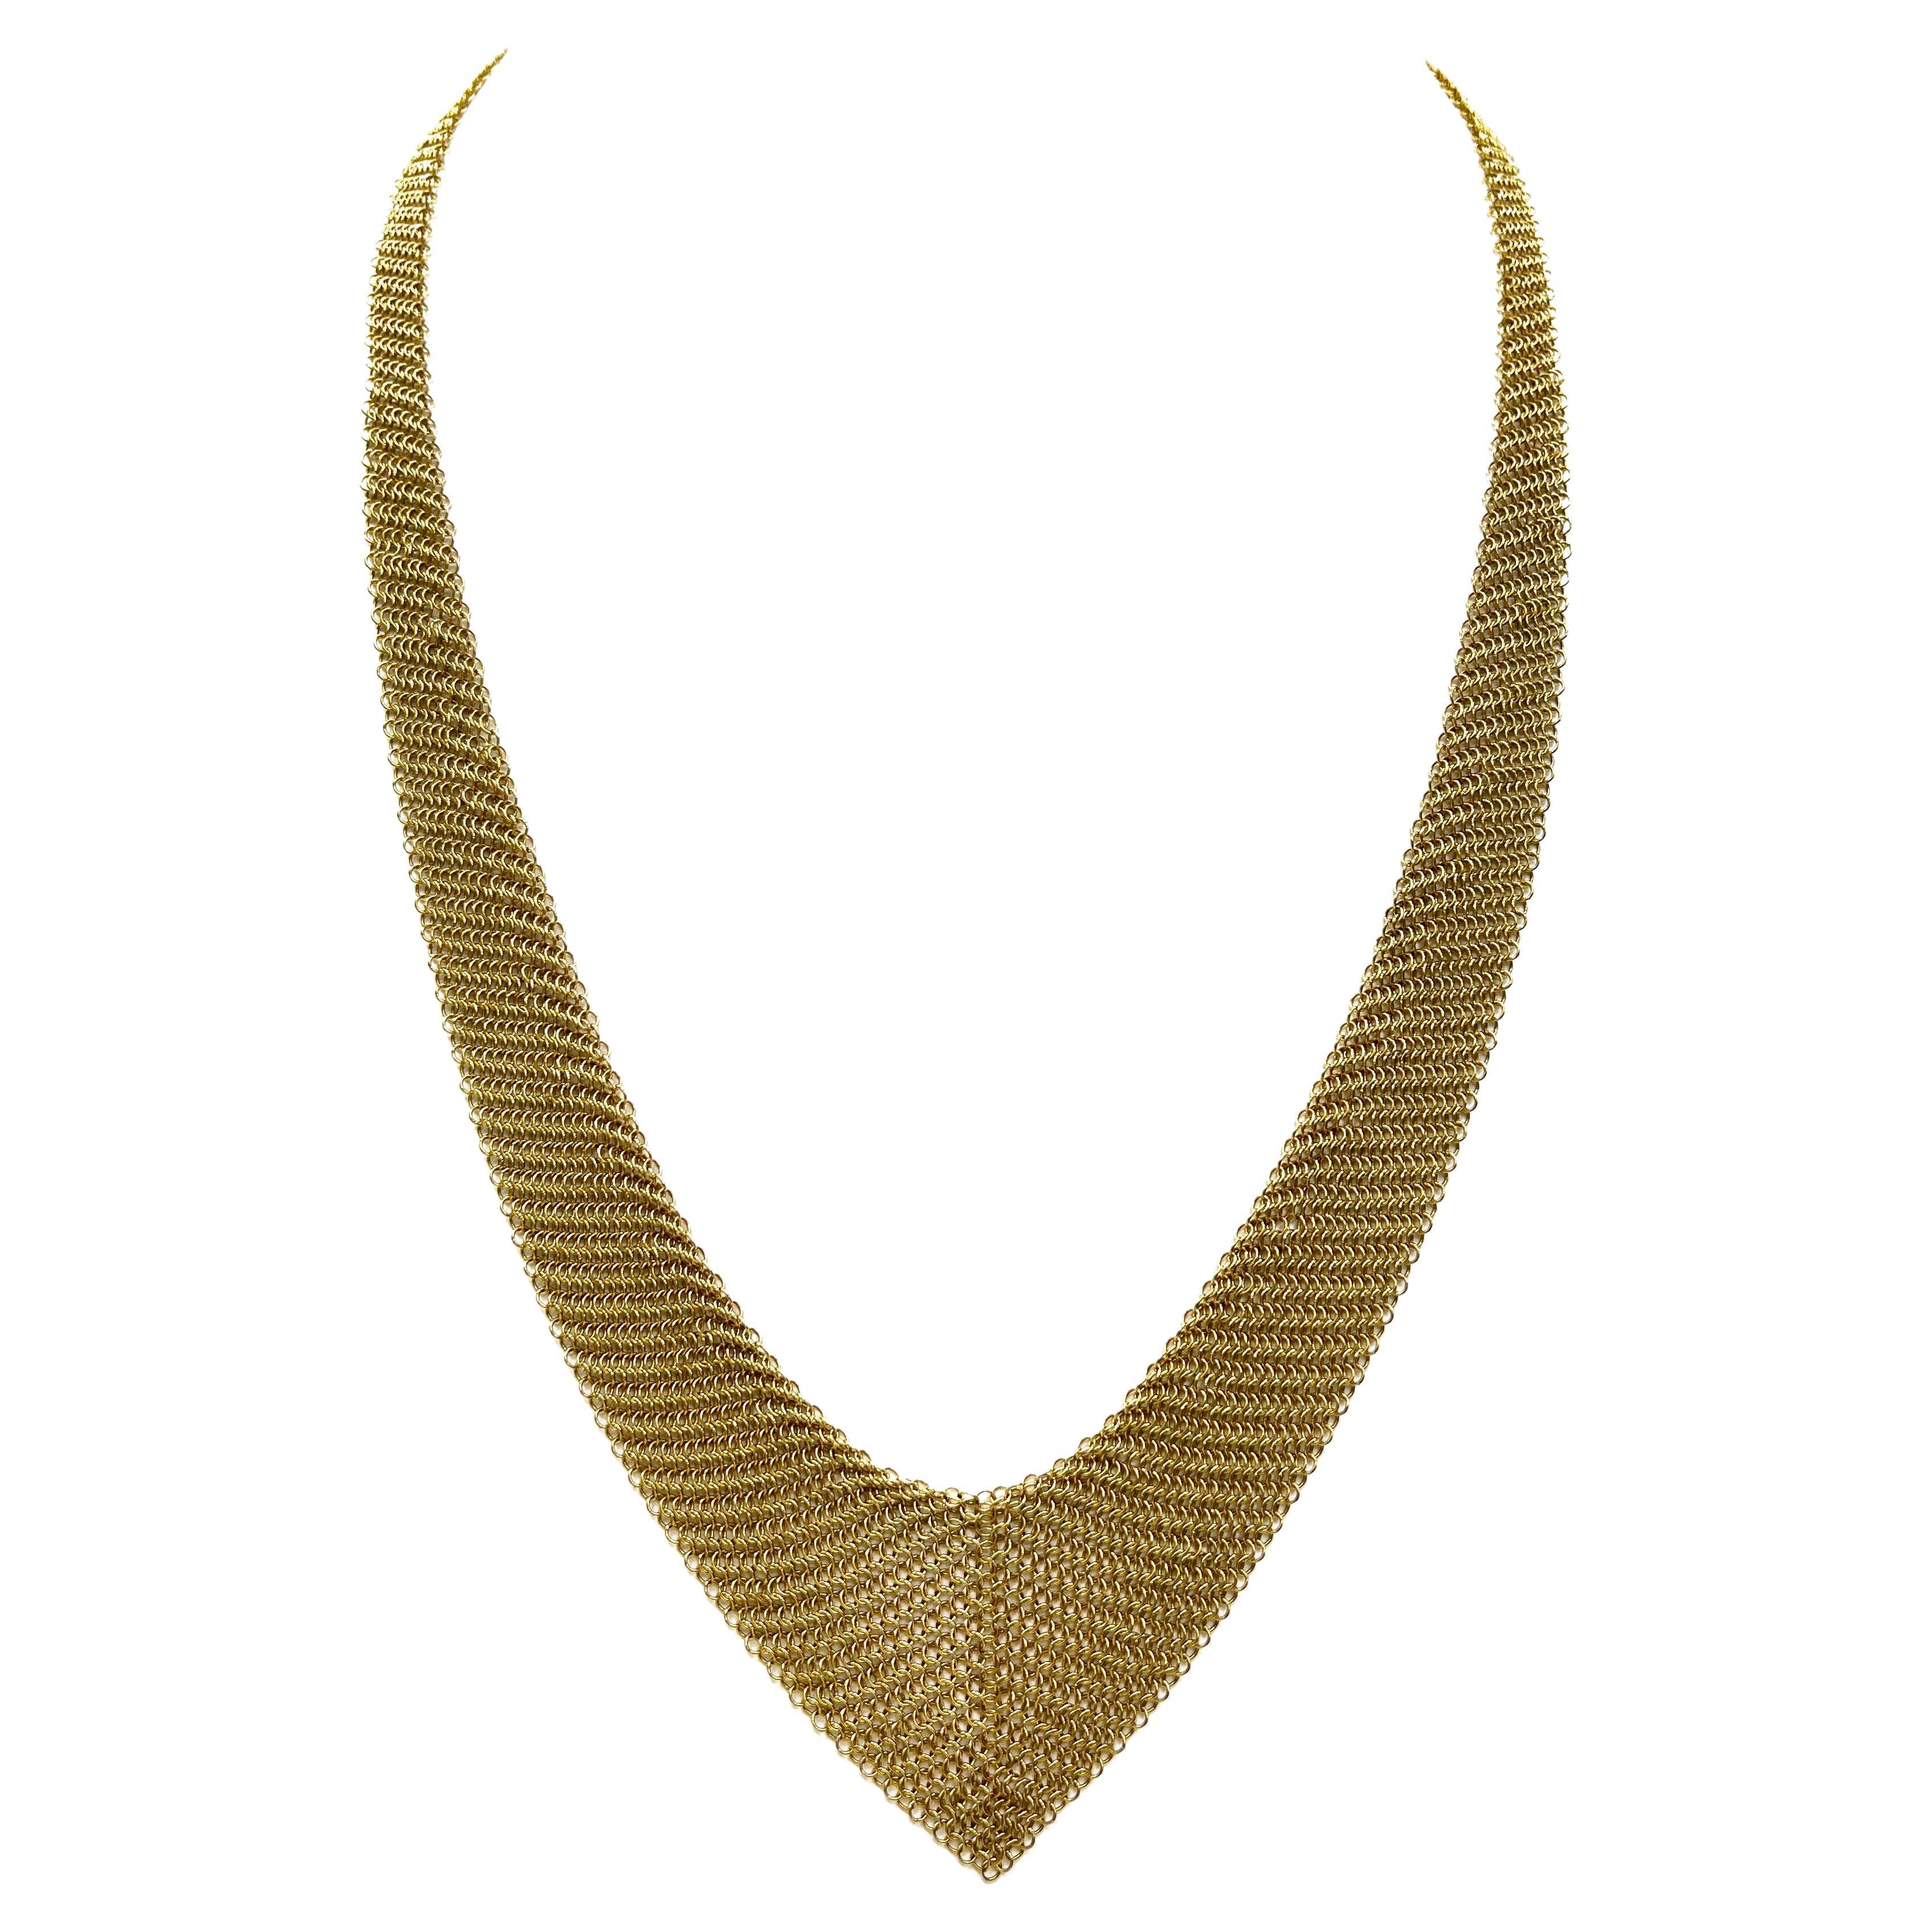 Elsa Peretti for Tiffany & Co. Gold Mesh Long Necklace